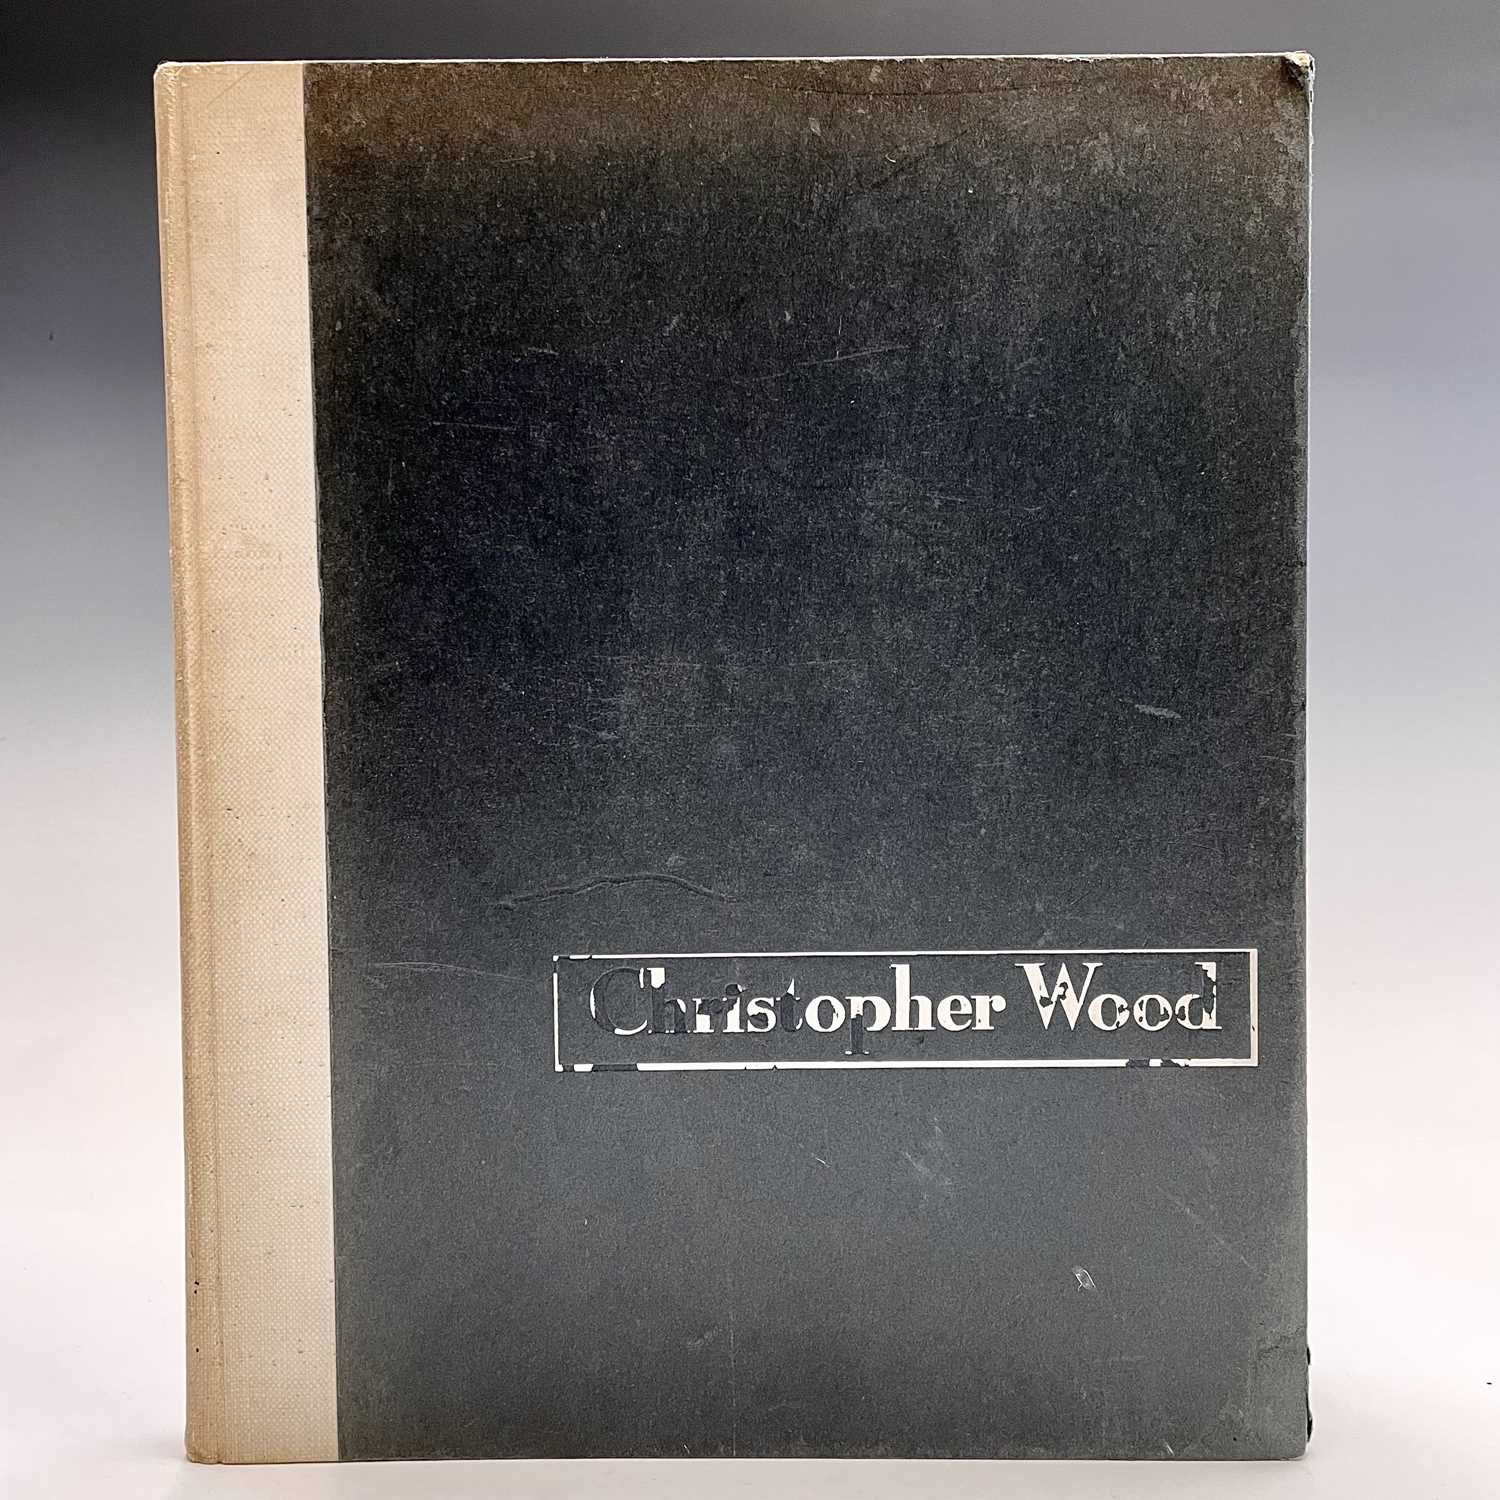 Christopher WOOD 'Exhibition of Complete Works' - hardback, first edition with original exhibition - Image 2 of 7